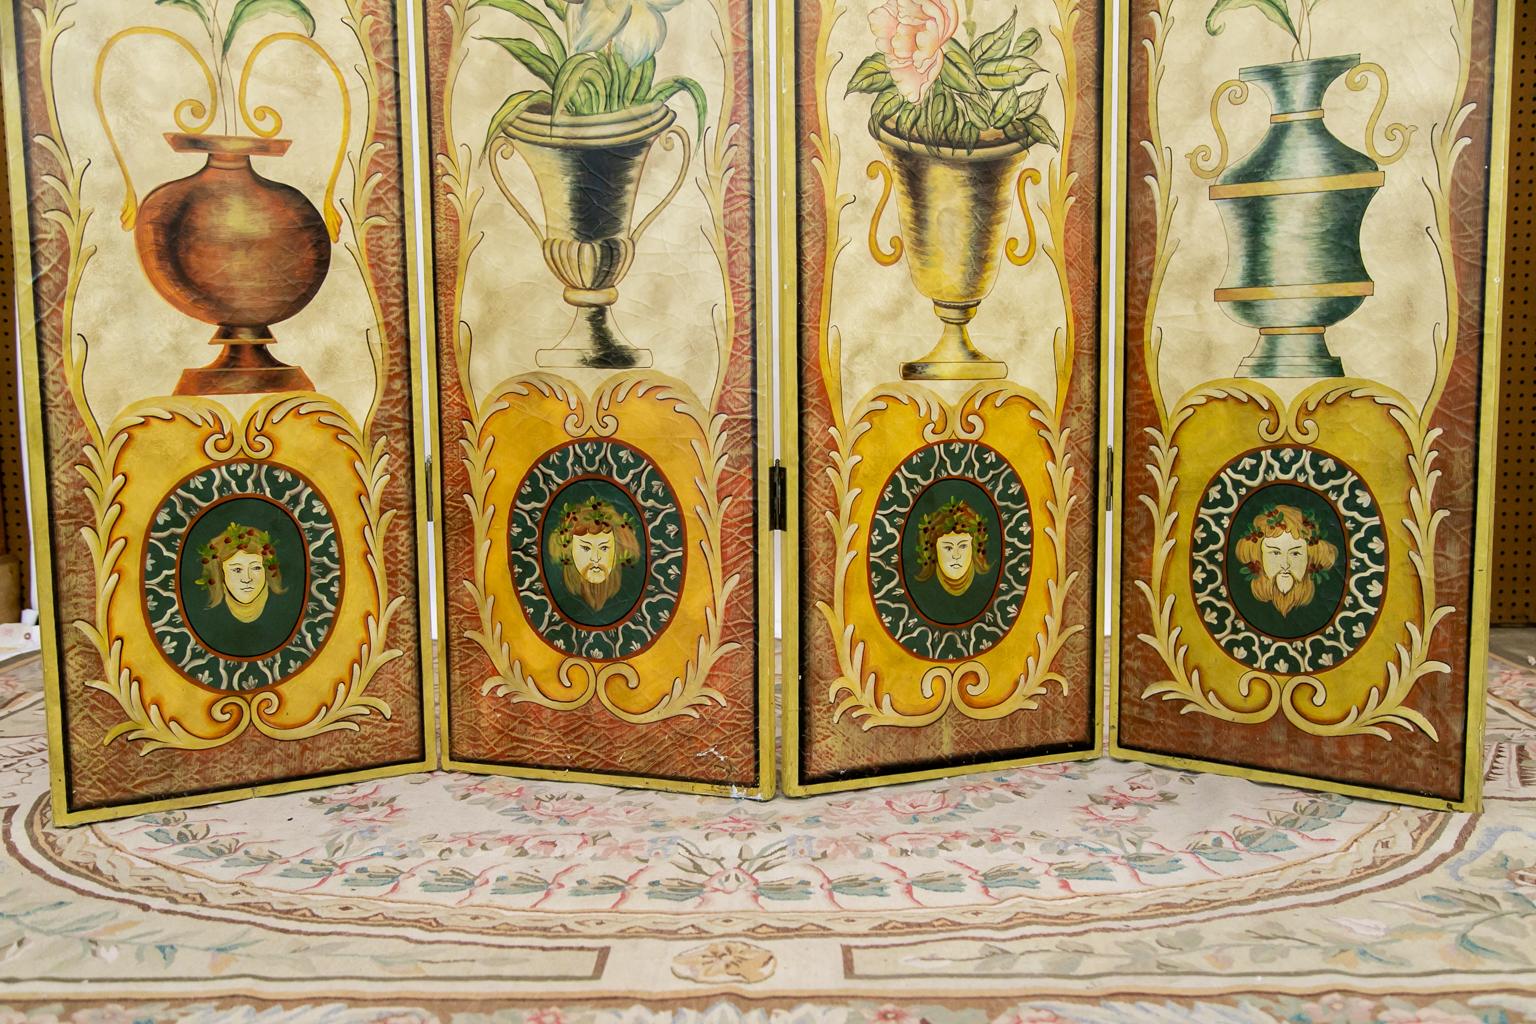 This folding screen is painted with classical urns, flowers, and teal valanced swags topping the center cartouche.

One panel measures: 17 7/8 